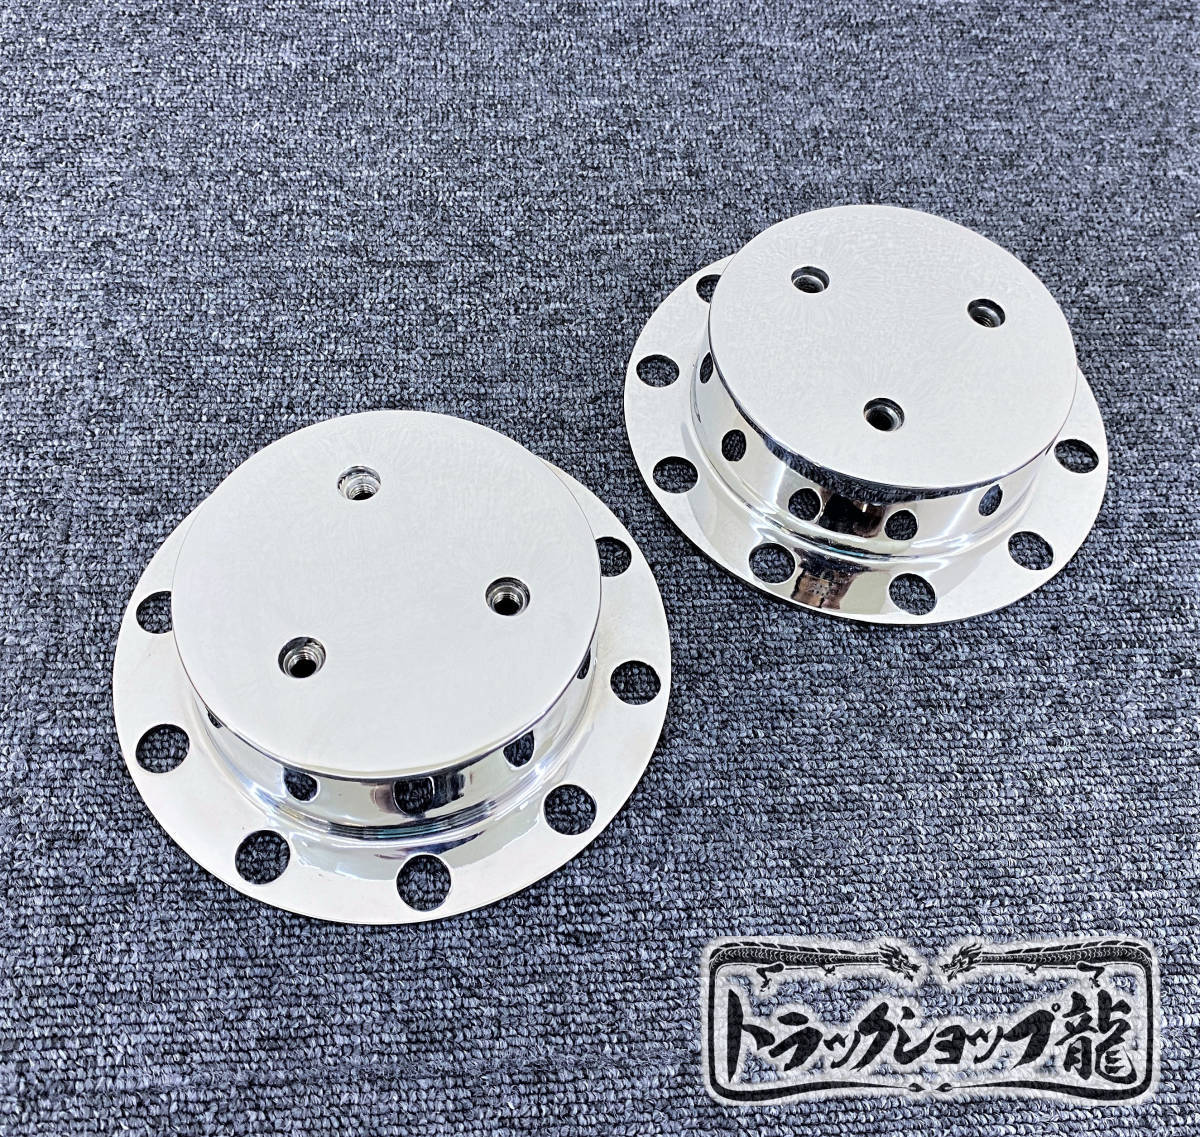  new goods! Isuzu 4t 17.5 -inch /19.5 -inch for stainless steel center cover installation bracket rear hub cap spin na-2 piece collection deco truck S0392D